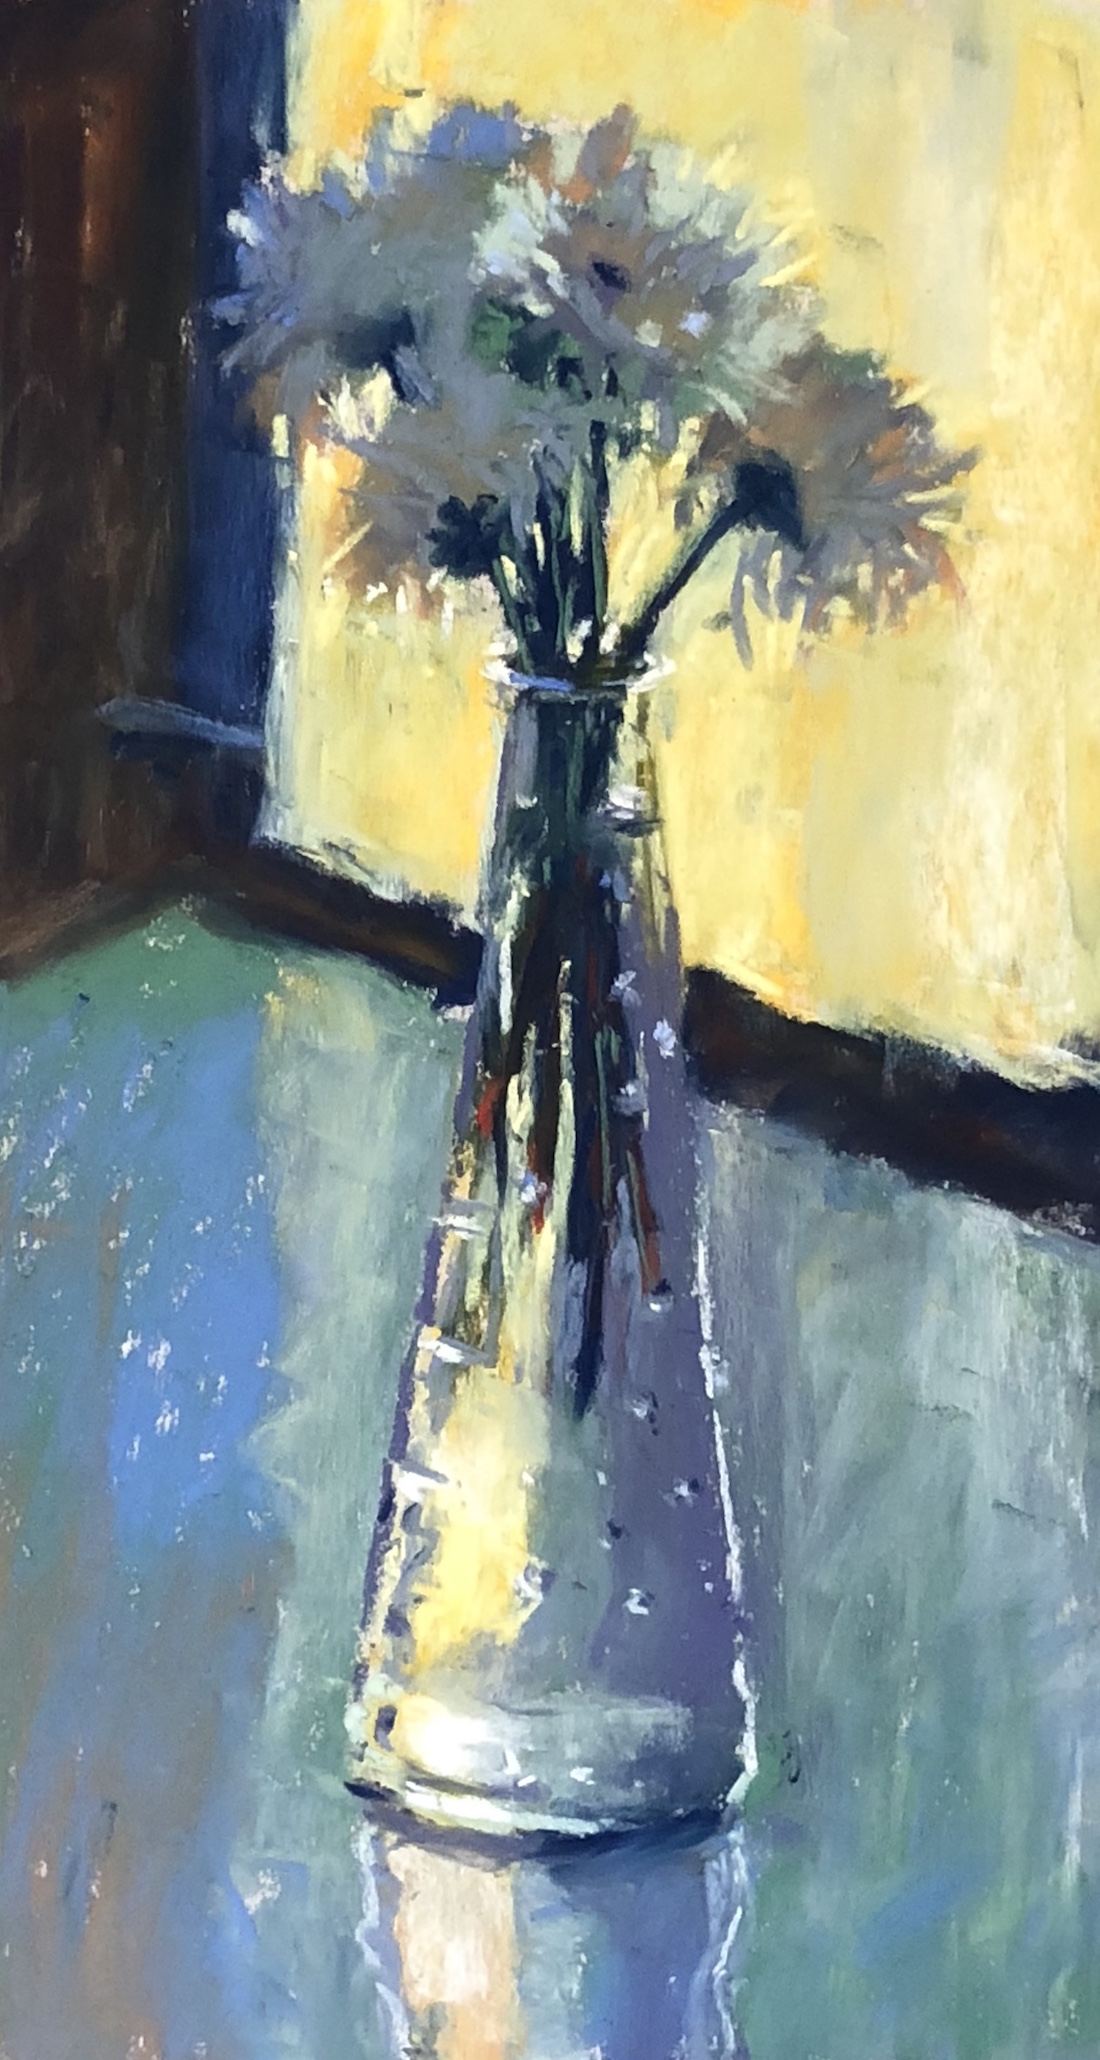 Explore a single subject: Gail Sibley, "Twilight," Unison Colour pastel on UART 800 paper, 11 x 6 in. Available.